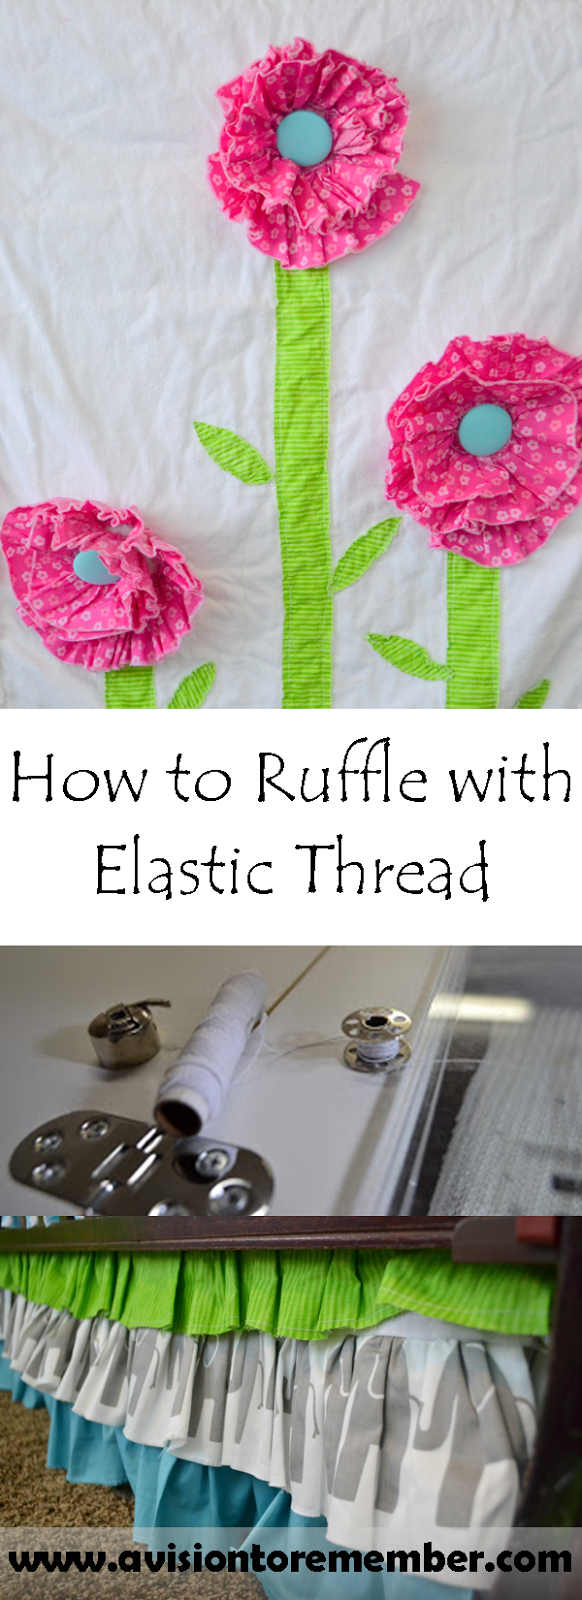 A Vision to Remember All Things Handmade Blog: Easiest Ruffling